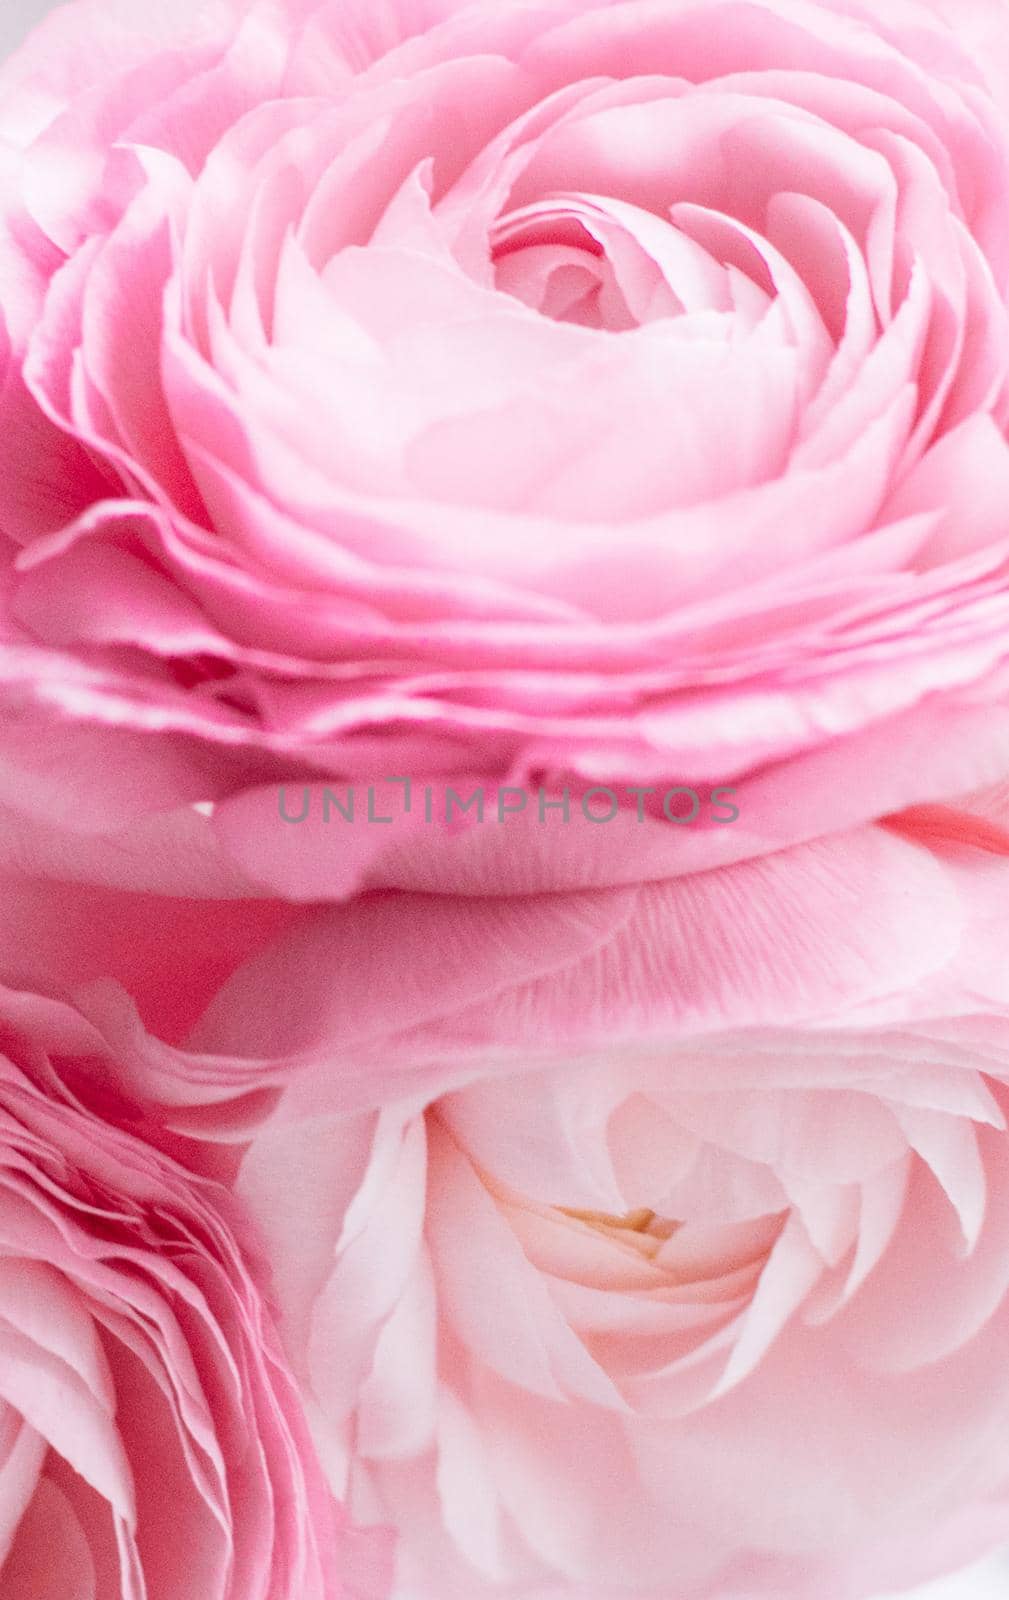 rose flowers close-up - wedding, holiday and floral background styled concept by Anneleven